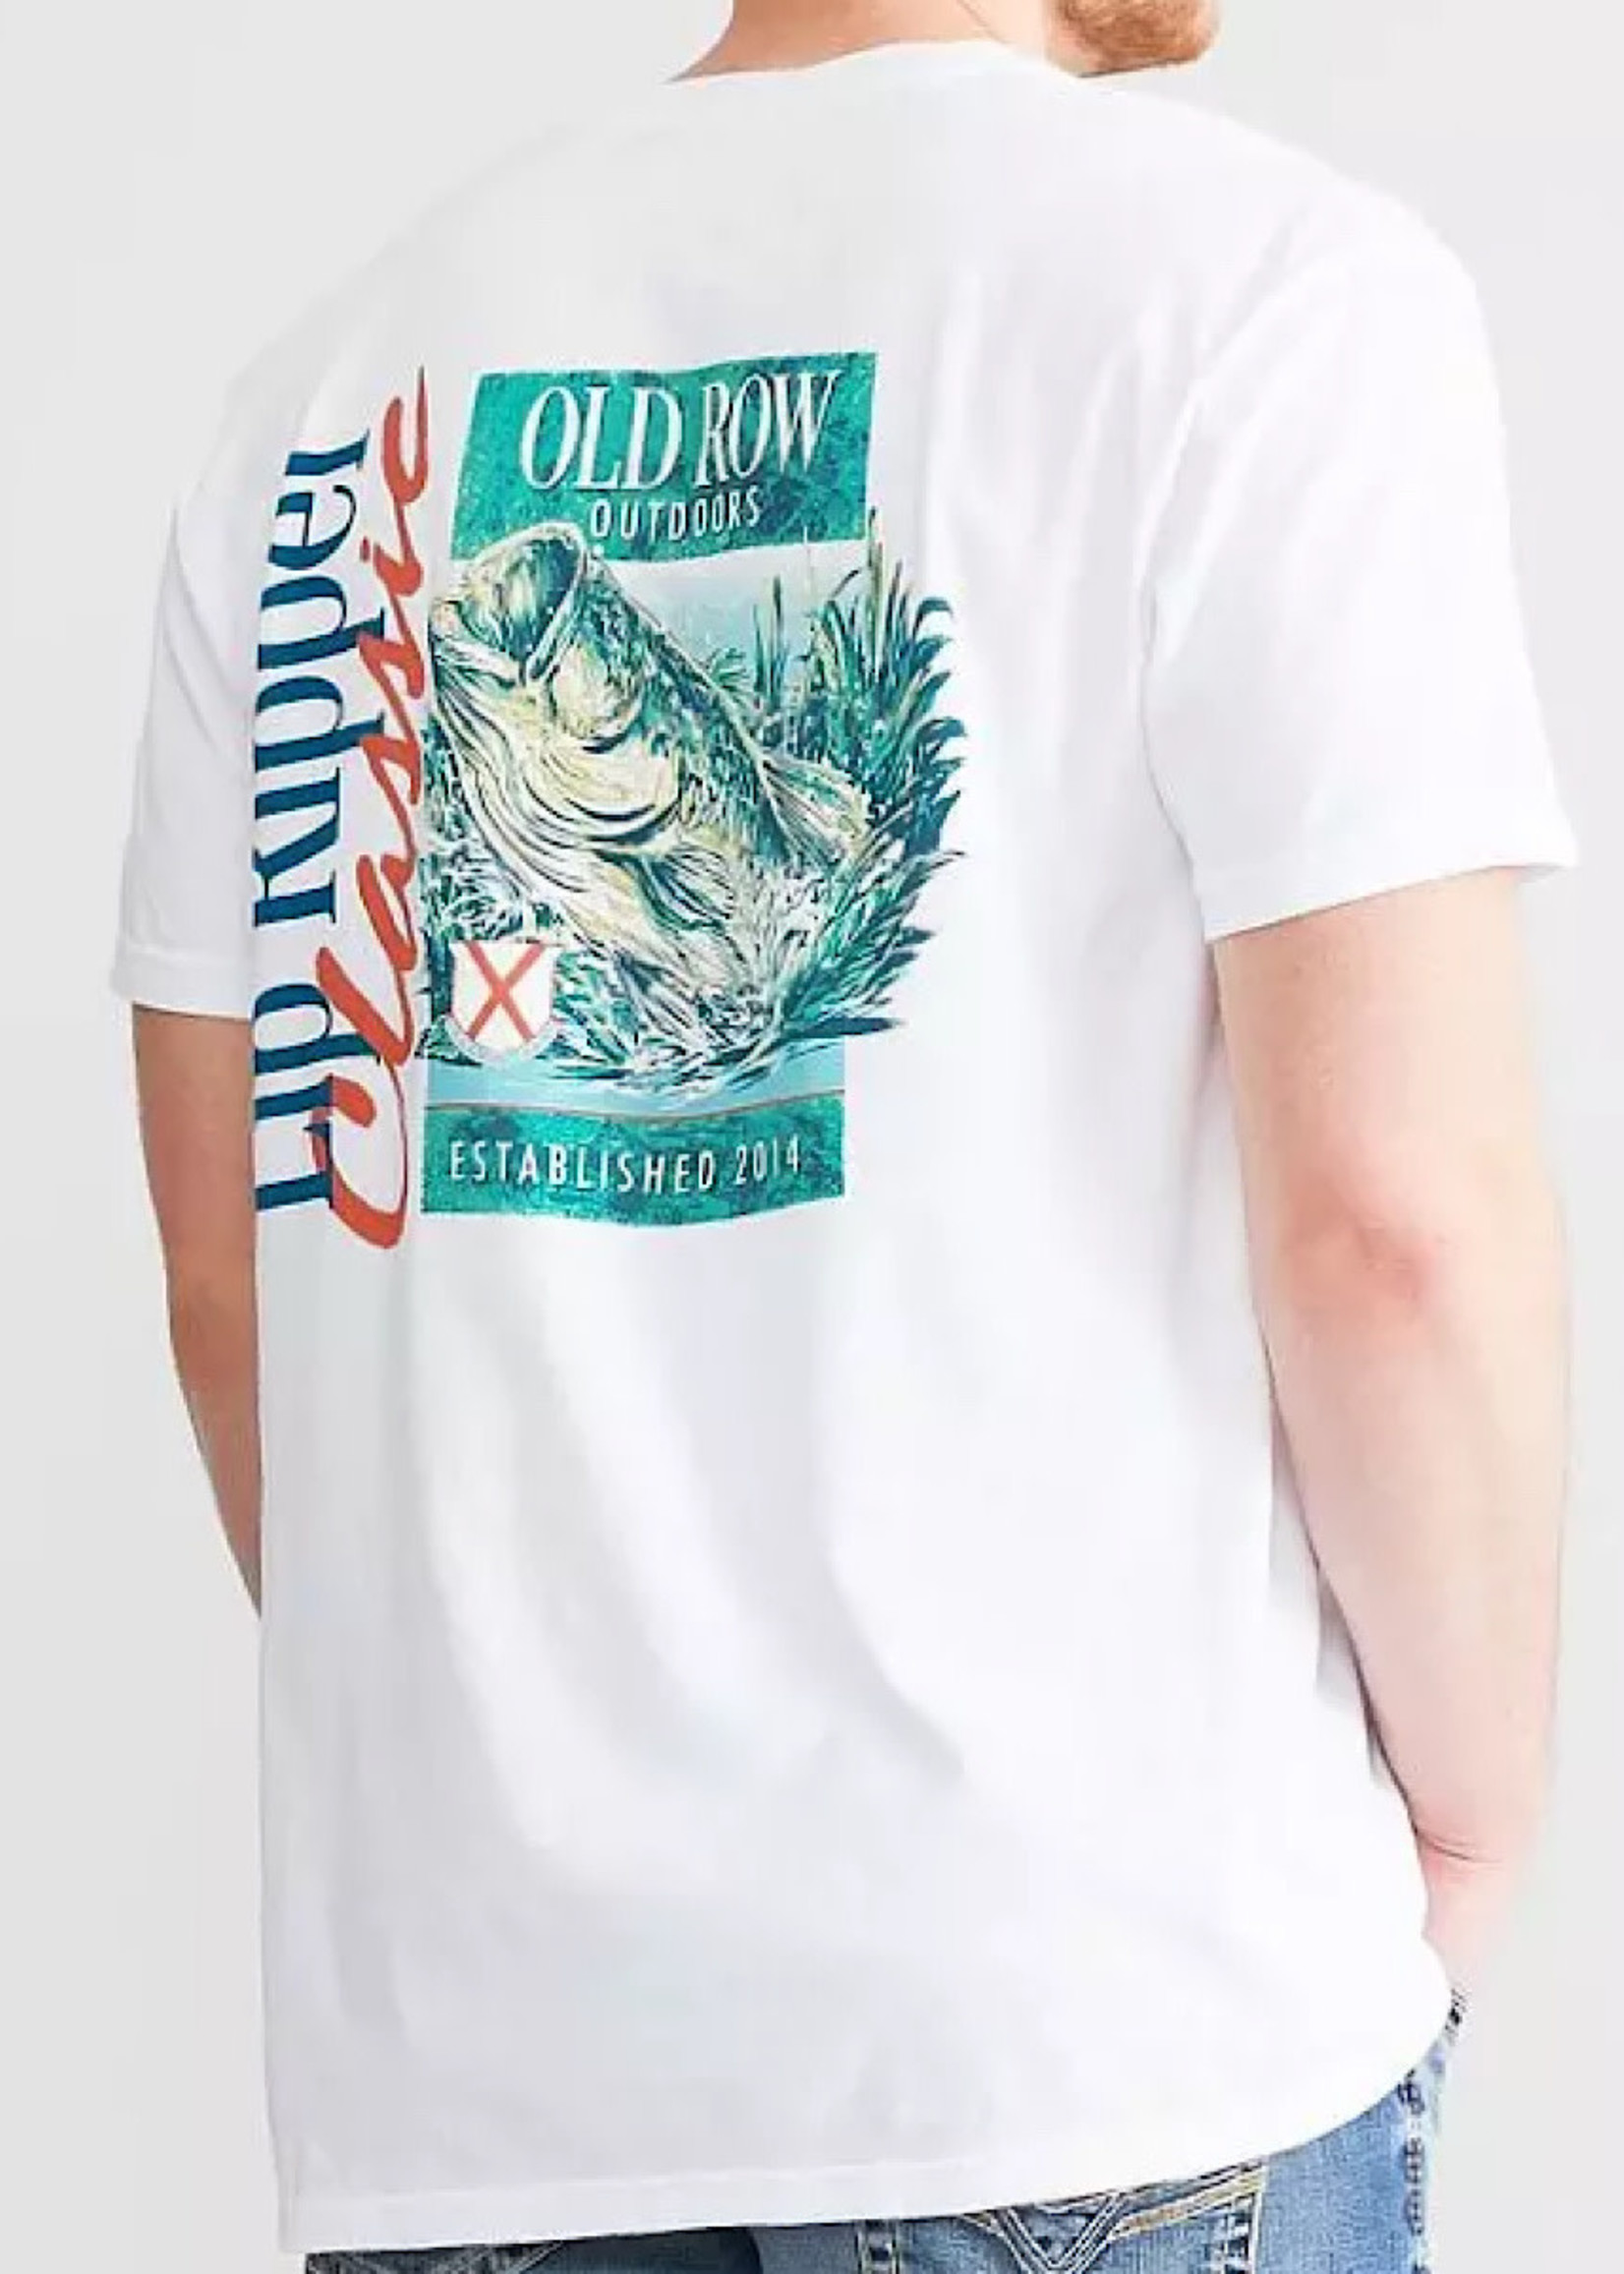 Old Row Old Row Outdoors Lip Ripper Classic Pocket Tee